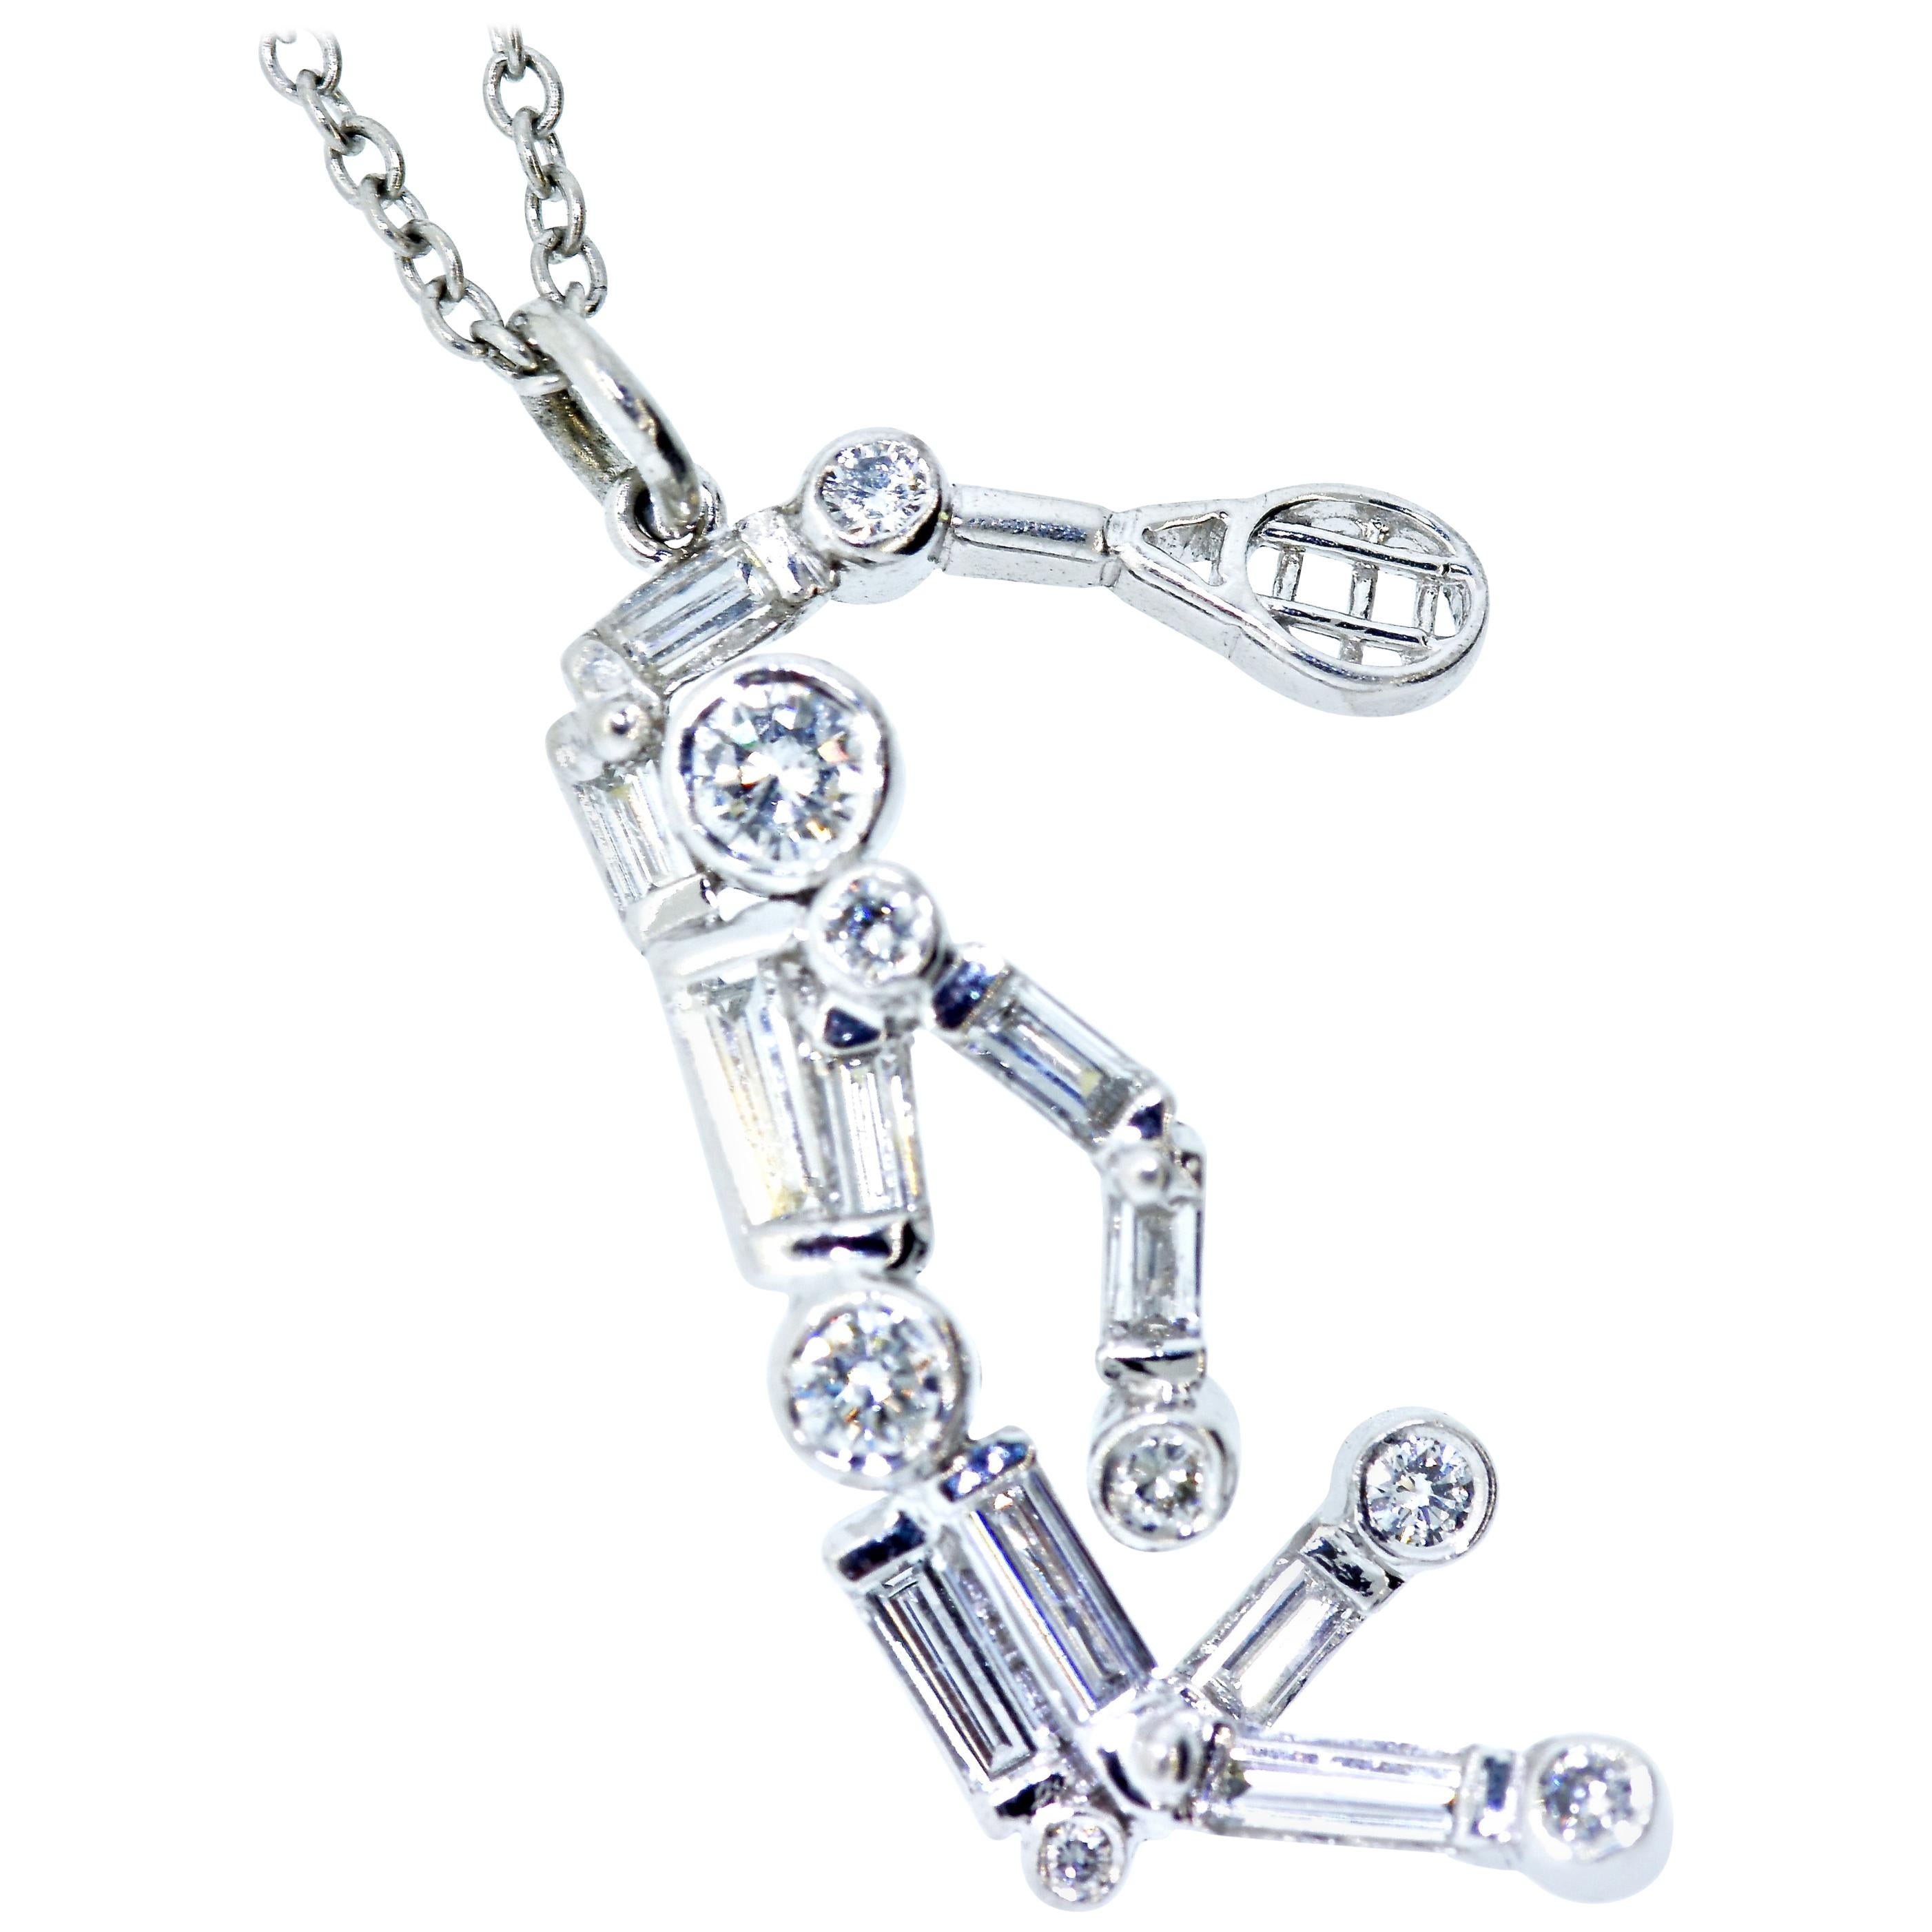 Tennis player with 1.0 cts of fancy cut fine white diamonds.  This pendant is hand made with fine white diamonds.  There are baguette cut diamonds, tapered baguettes and round modern brilliant cut diamonds.  All of these stones are colorless to near